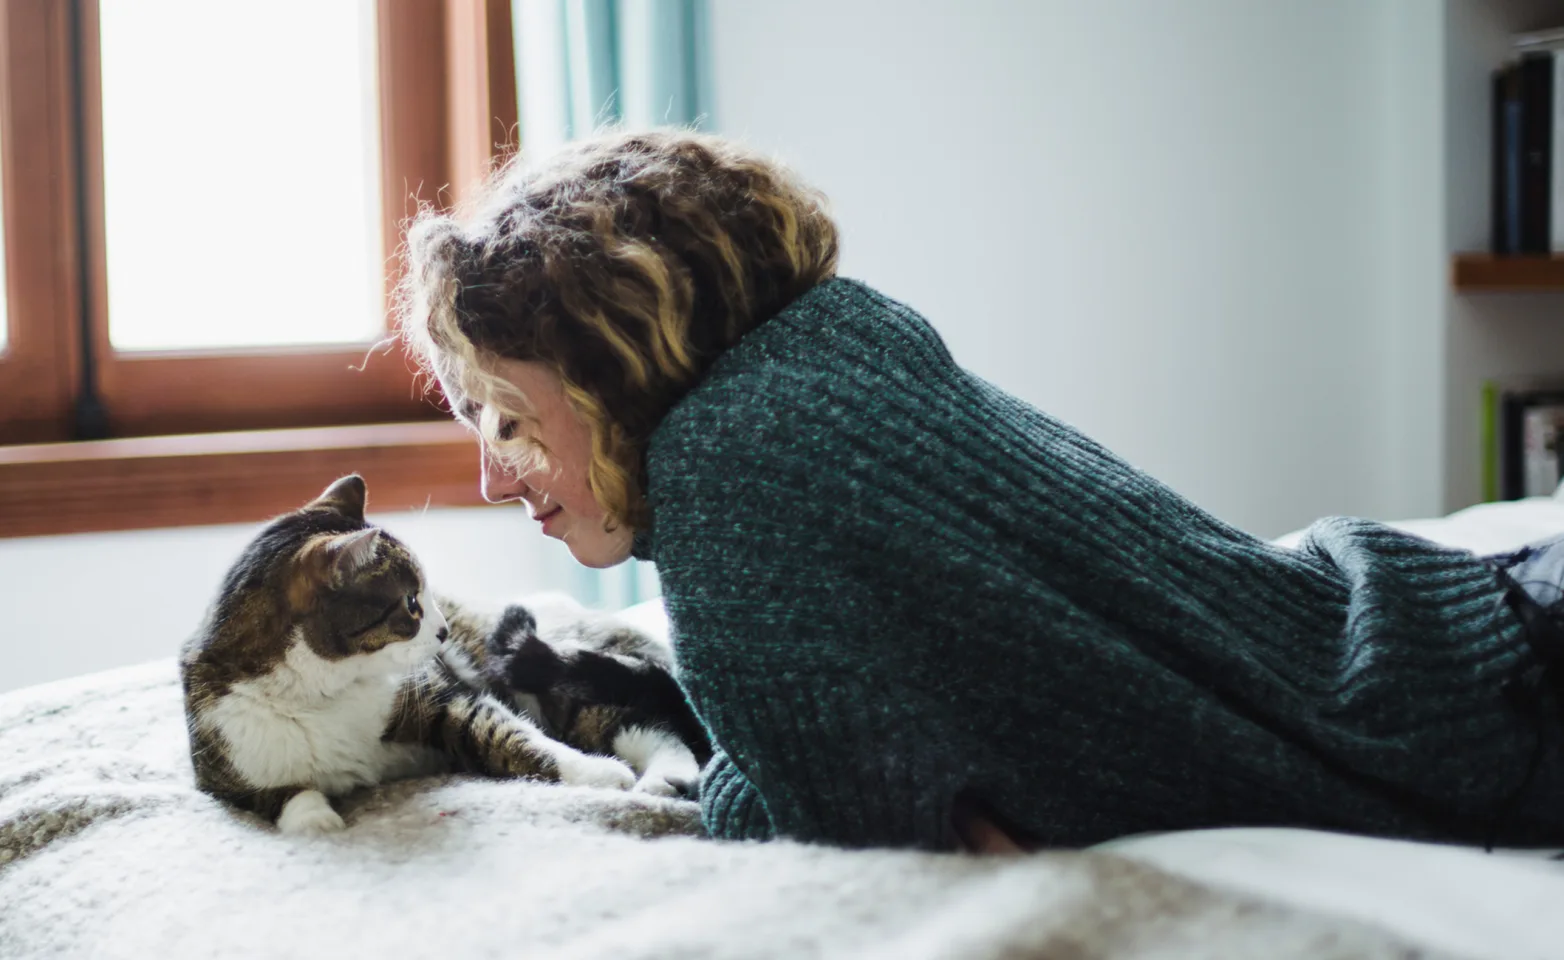 A woman and a cat looking at each other on a bed